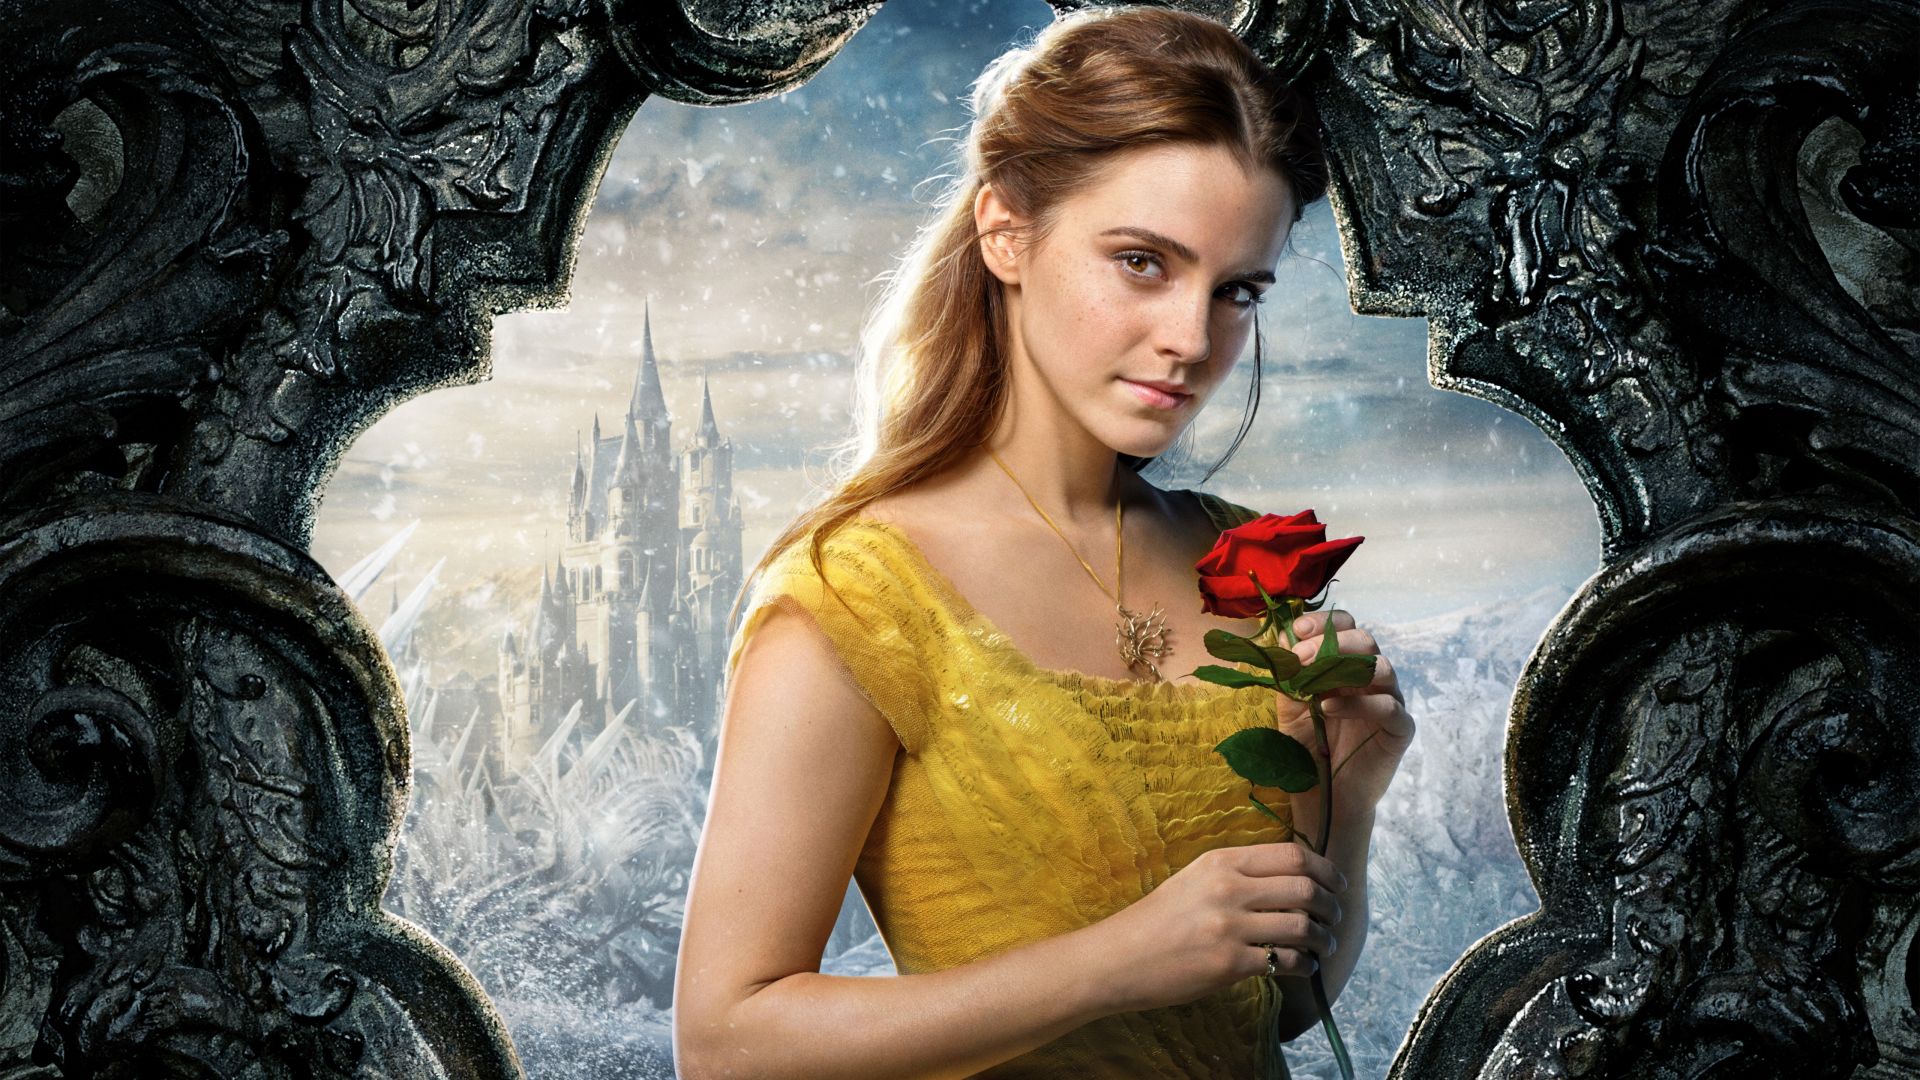 Wallpaper Eamma Watson of Beauty and the beast 2017 movie